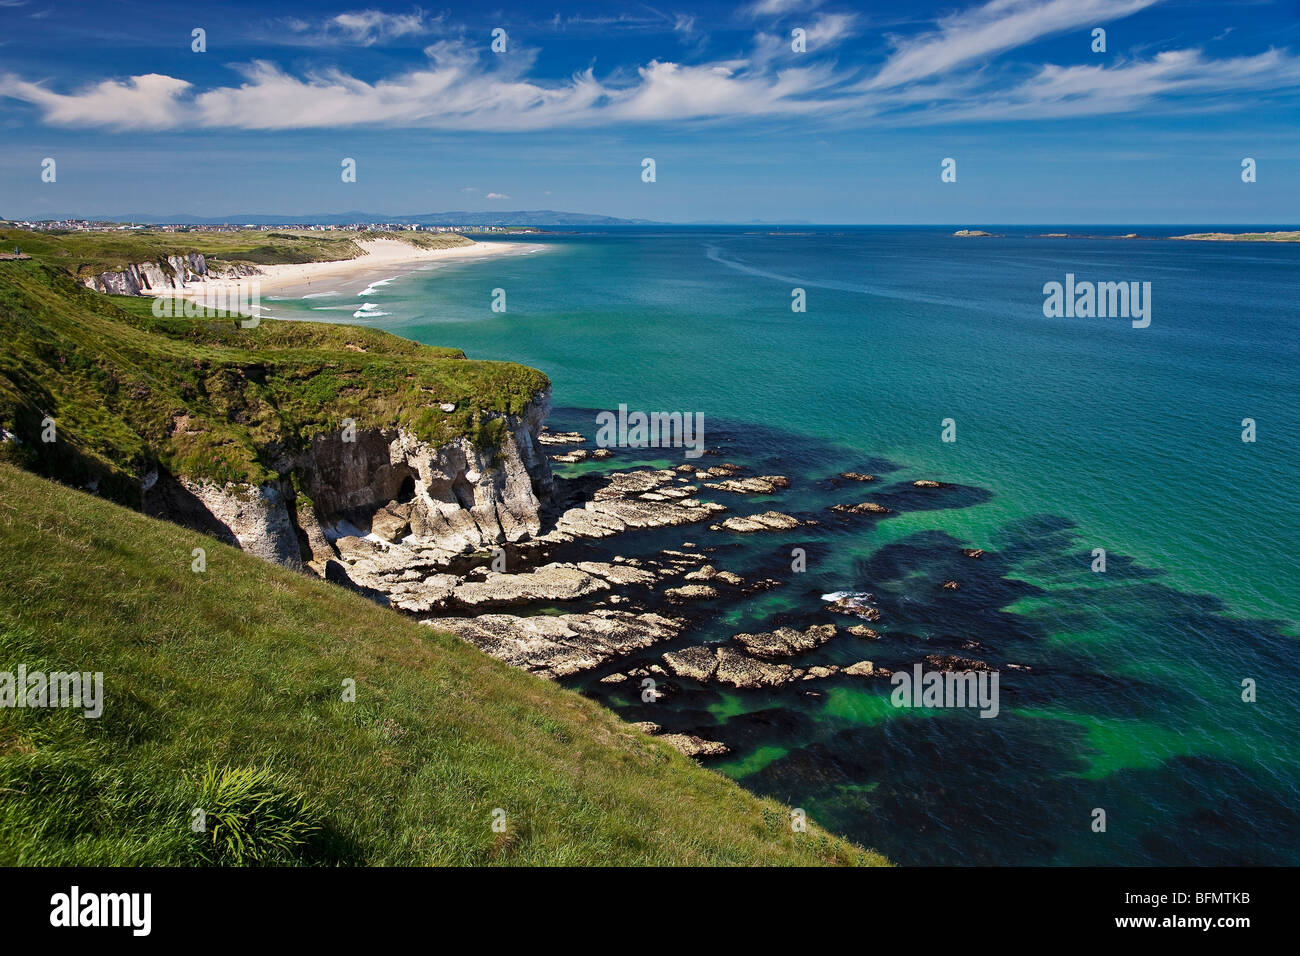 United Kingdom, Northern Ireland, Derry Portrush, view of Portrush Strand with the town of Portrush in the background. Stock Photo